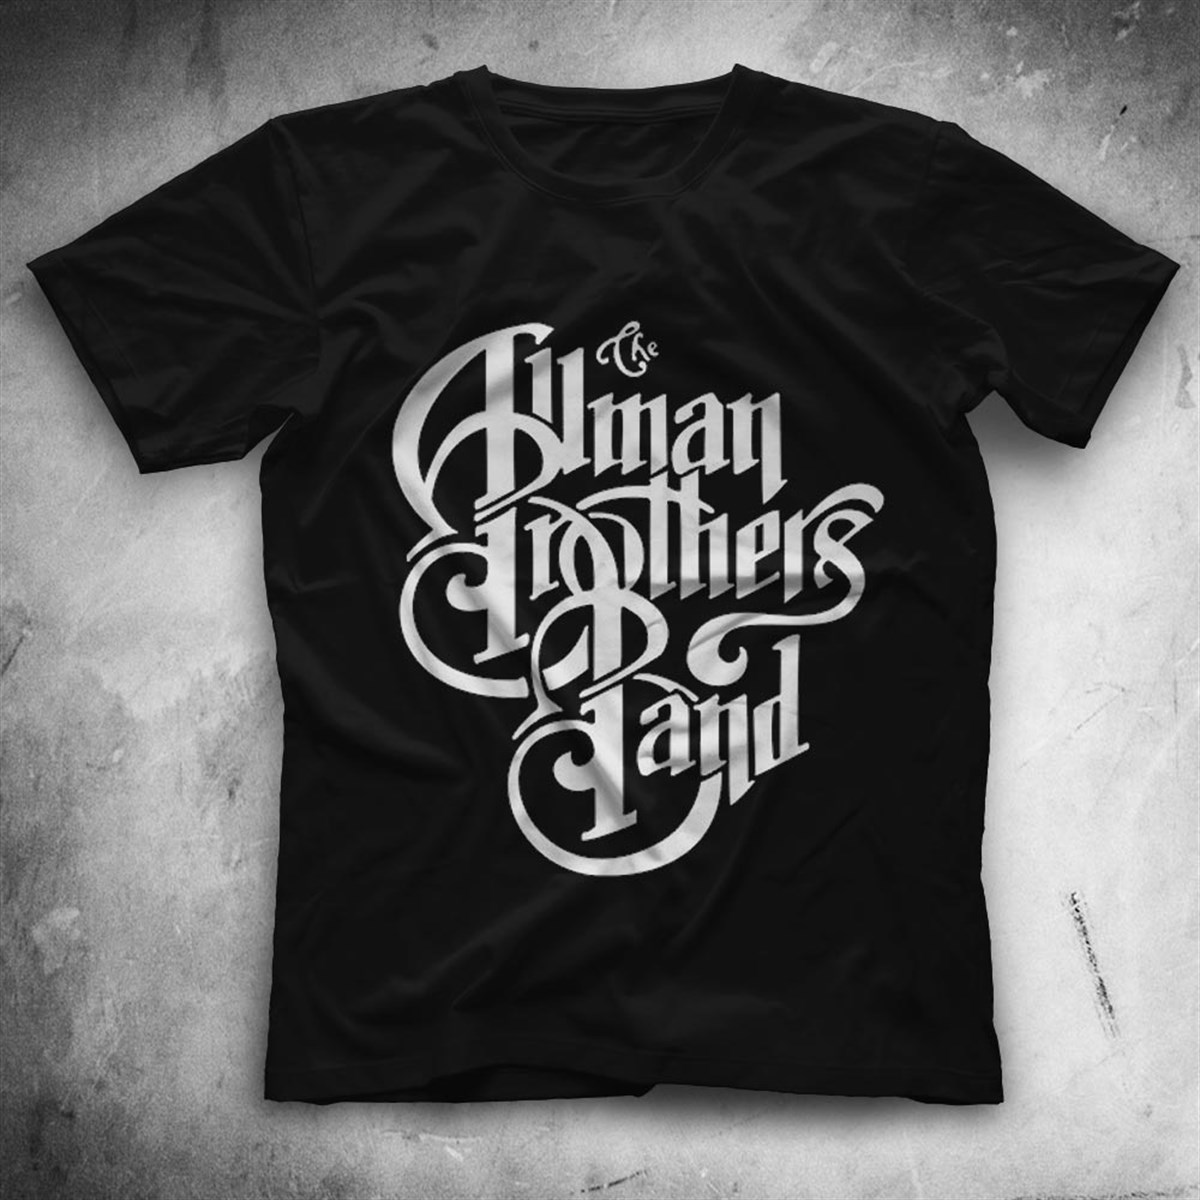 The Allman Brothers Band T shirt 01